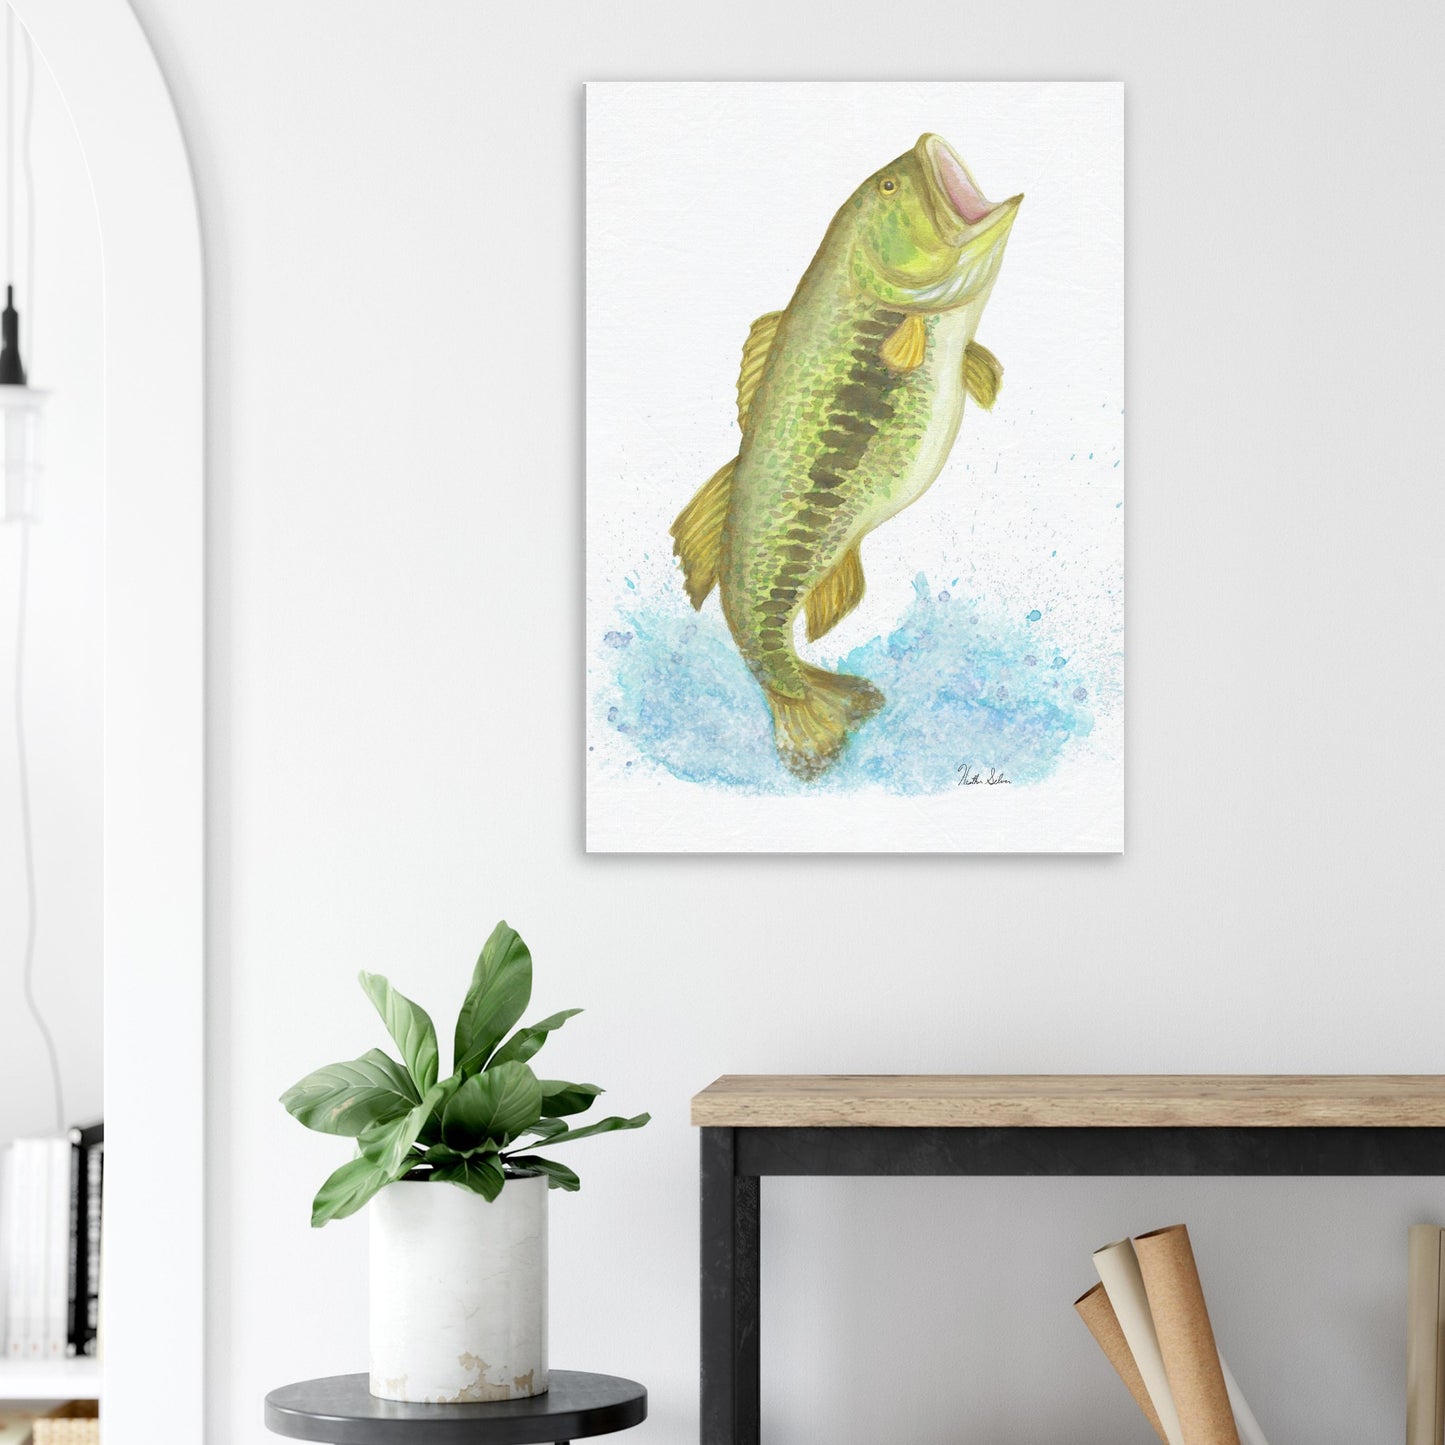 28 by 40 inch slim canvas wall art print featuring a watercolor painting of a largemouth bass leaping from the water. Shown on wall above wooden end table and potted plant.